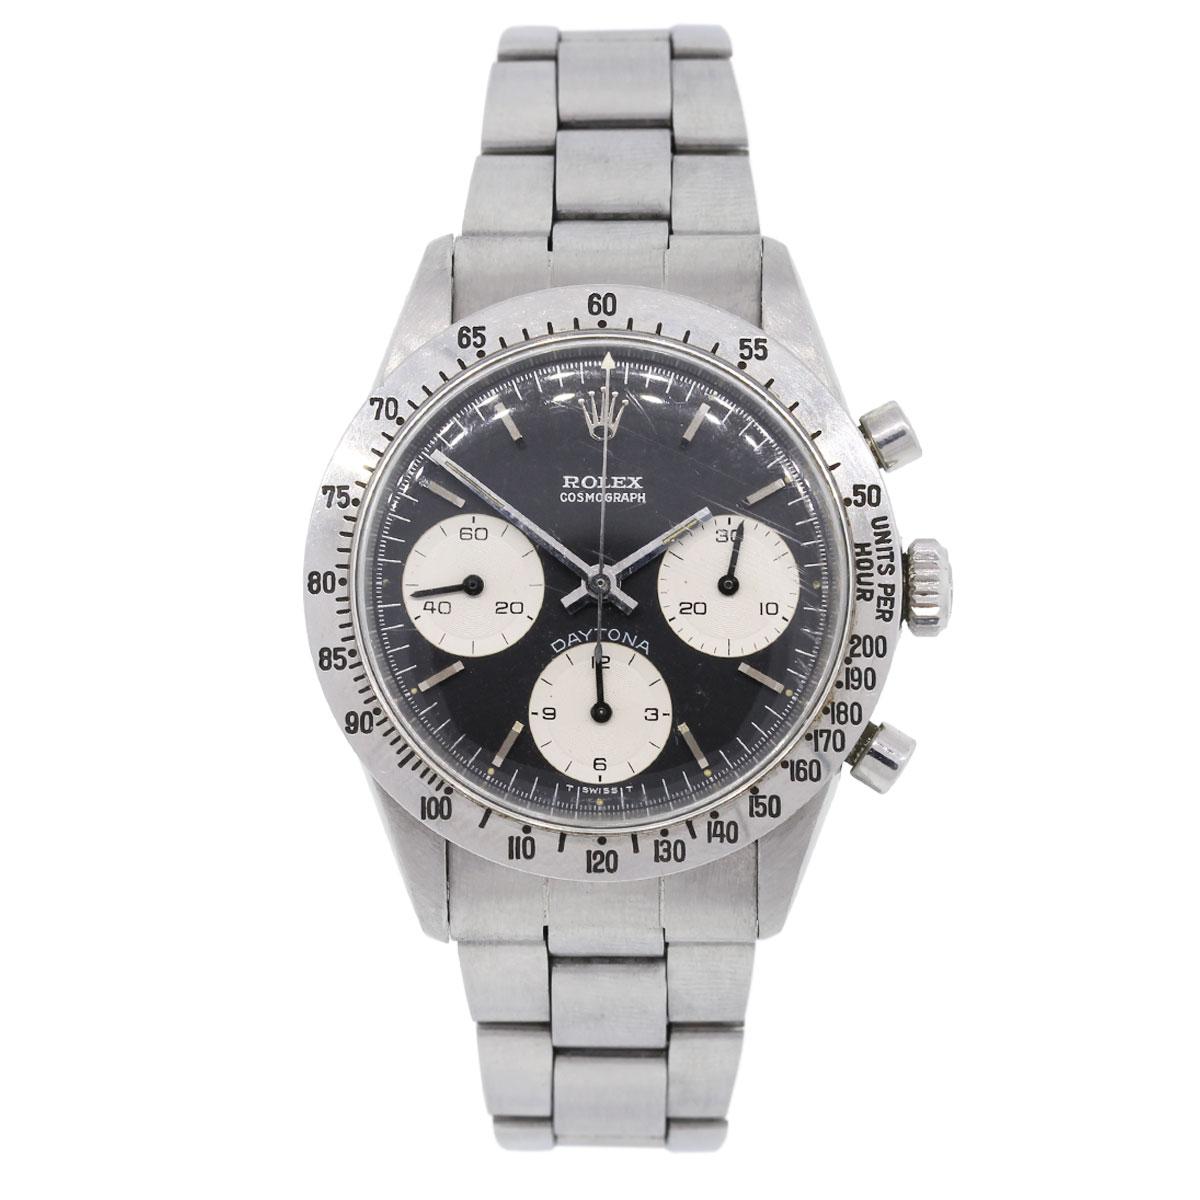 Brand: Rolex
MPN: 6262
Model: Daytona
Case Material: Stainless Steel
Case Diameter: 36.5mm
Crystal: Plastic
Bezel: Stainless steel engraved bezel
Dial: Black chronograph dial
Bracelet: Stainless steel oyster band
Size: Will fit a 7″ wrist
Clasp: